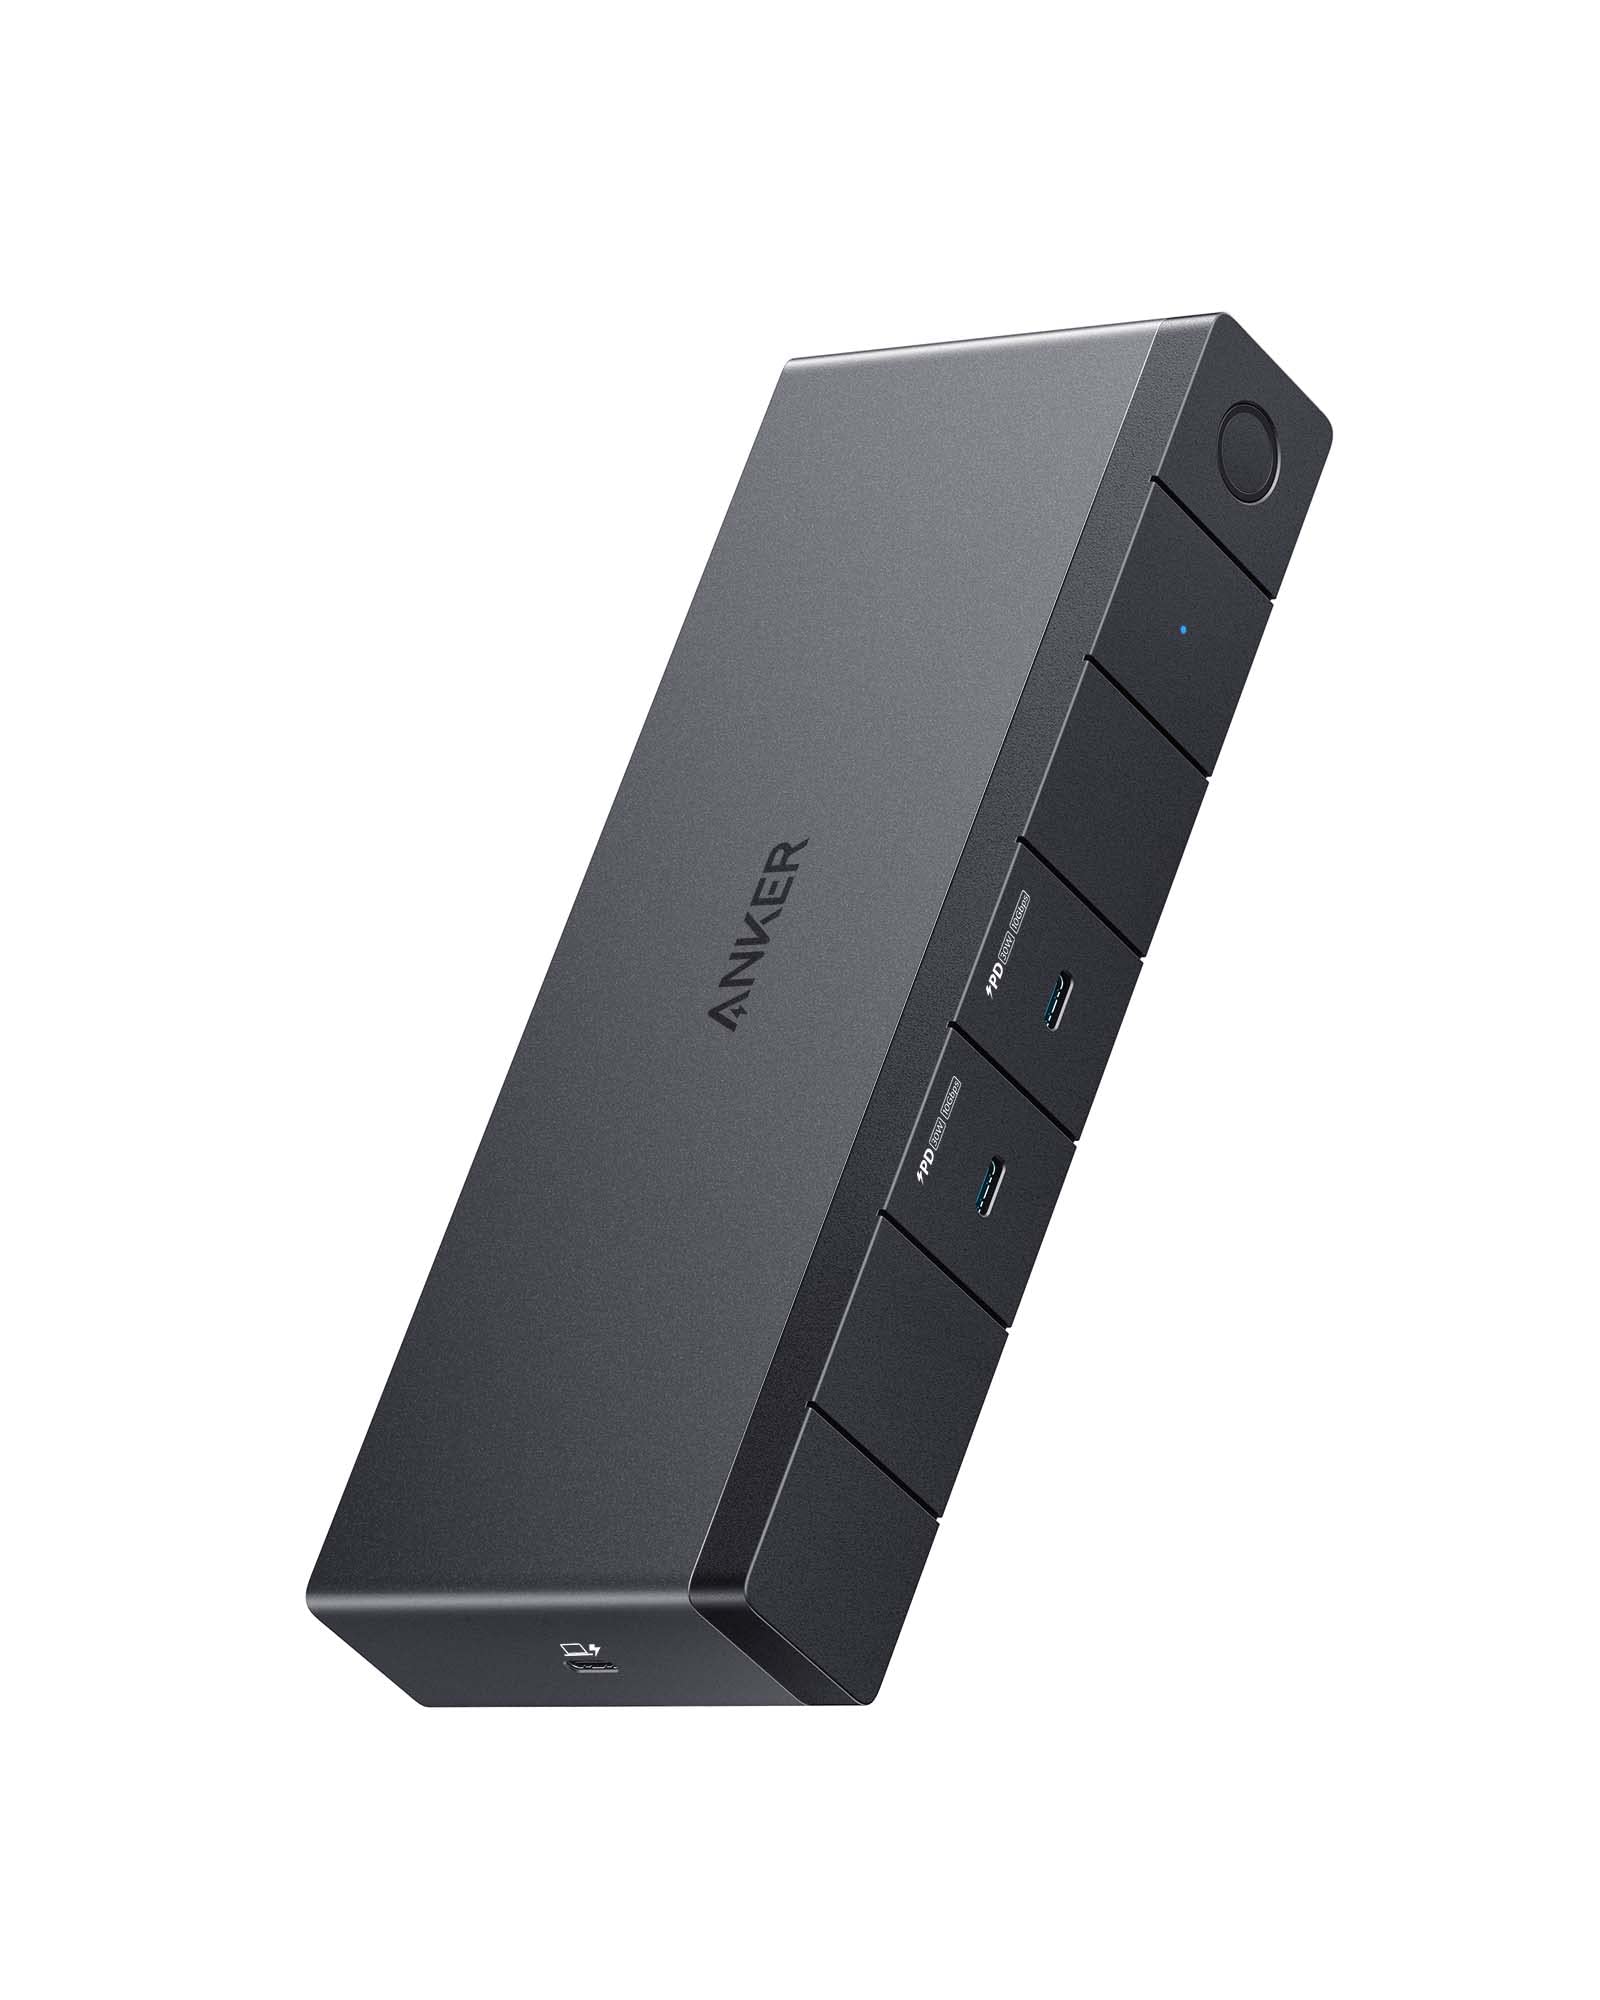 Anker 568 USB-C Docking Station (11-in-1, USB4), Up to 100W Charging for Laptop, 40Gbps Data Transfer, Ethernet, Single 8K, Triple 4K Display, 6 USB Ports for Windows Laptop and More(Gray)